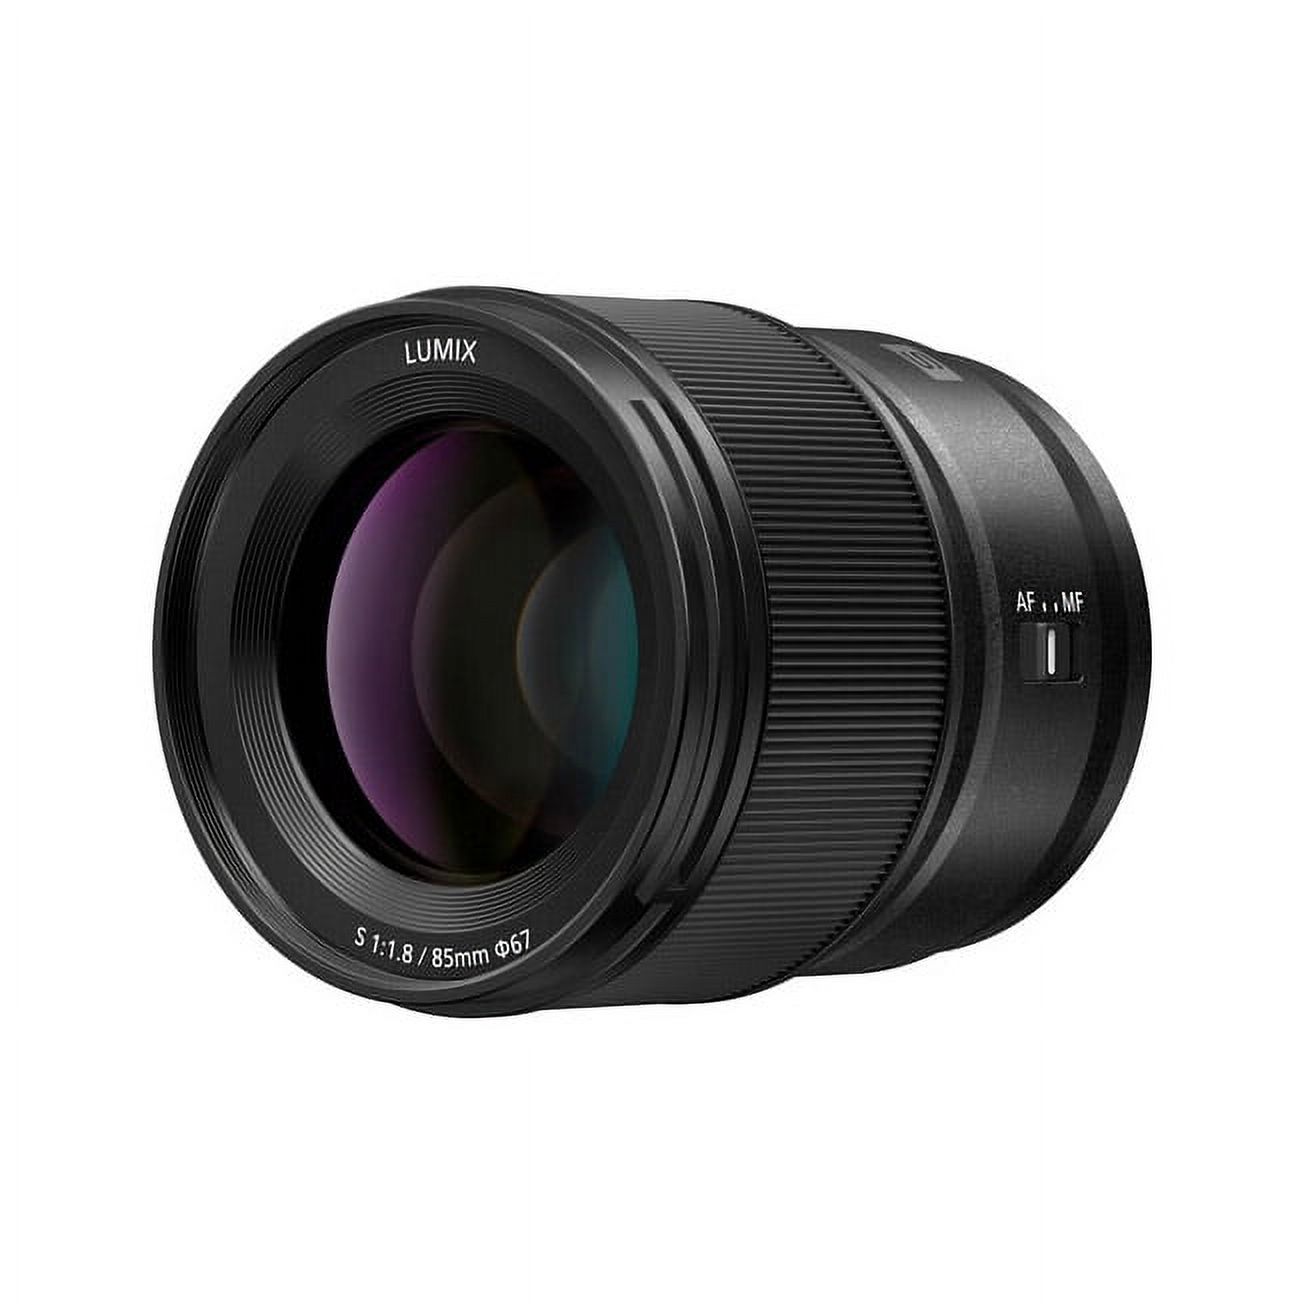 Panasonic LUMIX S 85mm F1.8 Lens for L-Mount Mirrorless Full Frame Cameras S-S85 - image 2 of 5